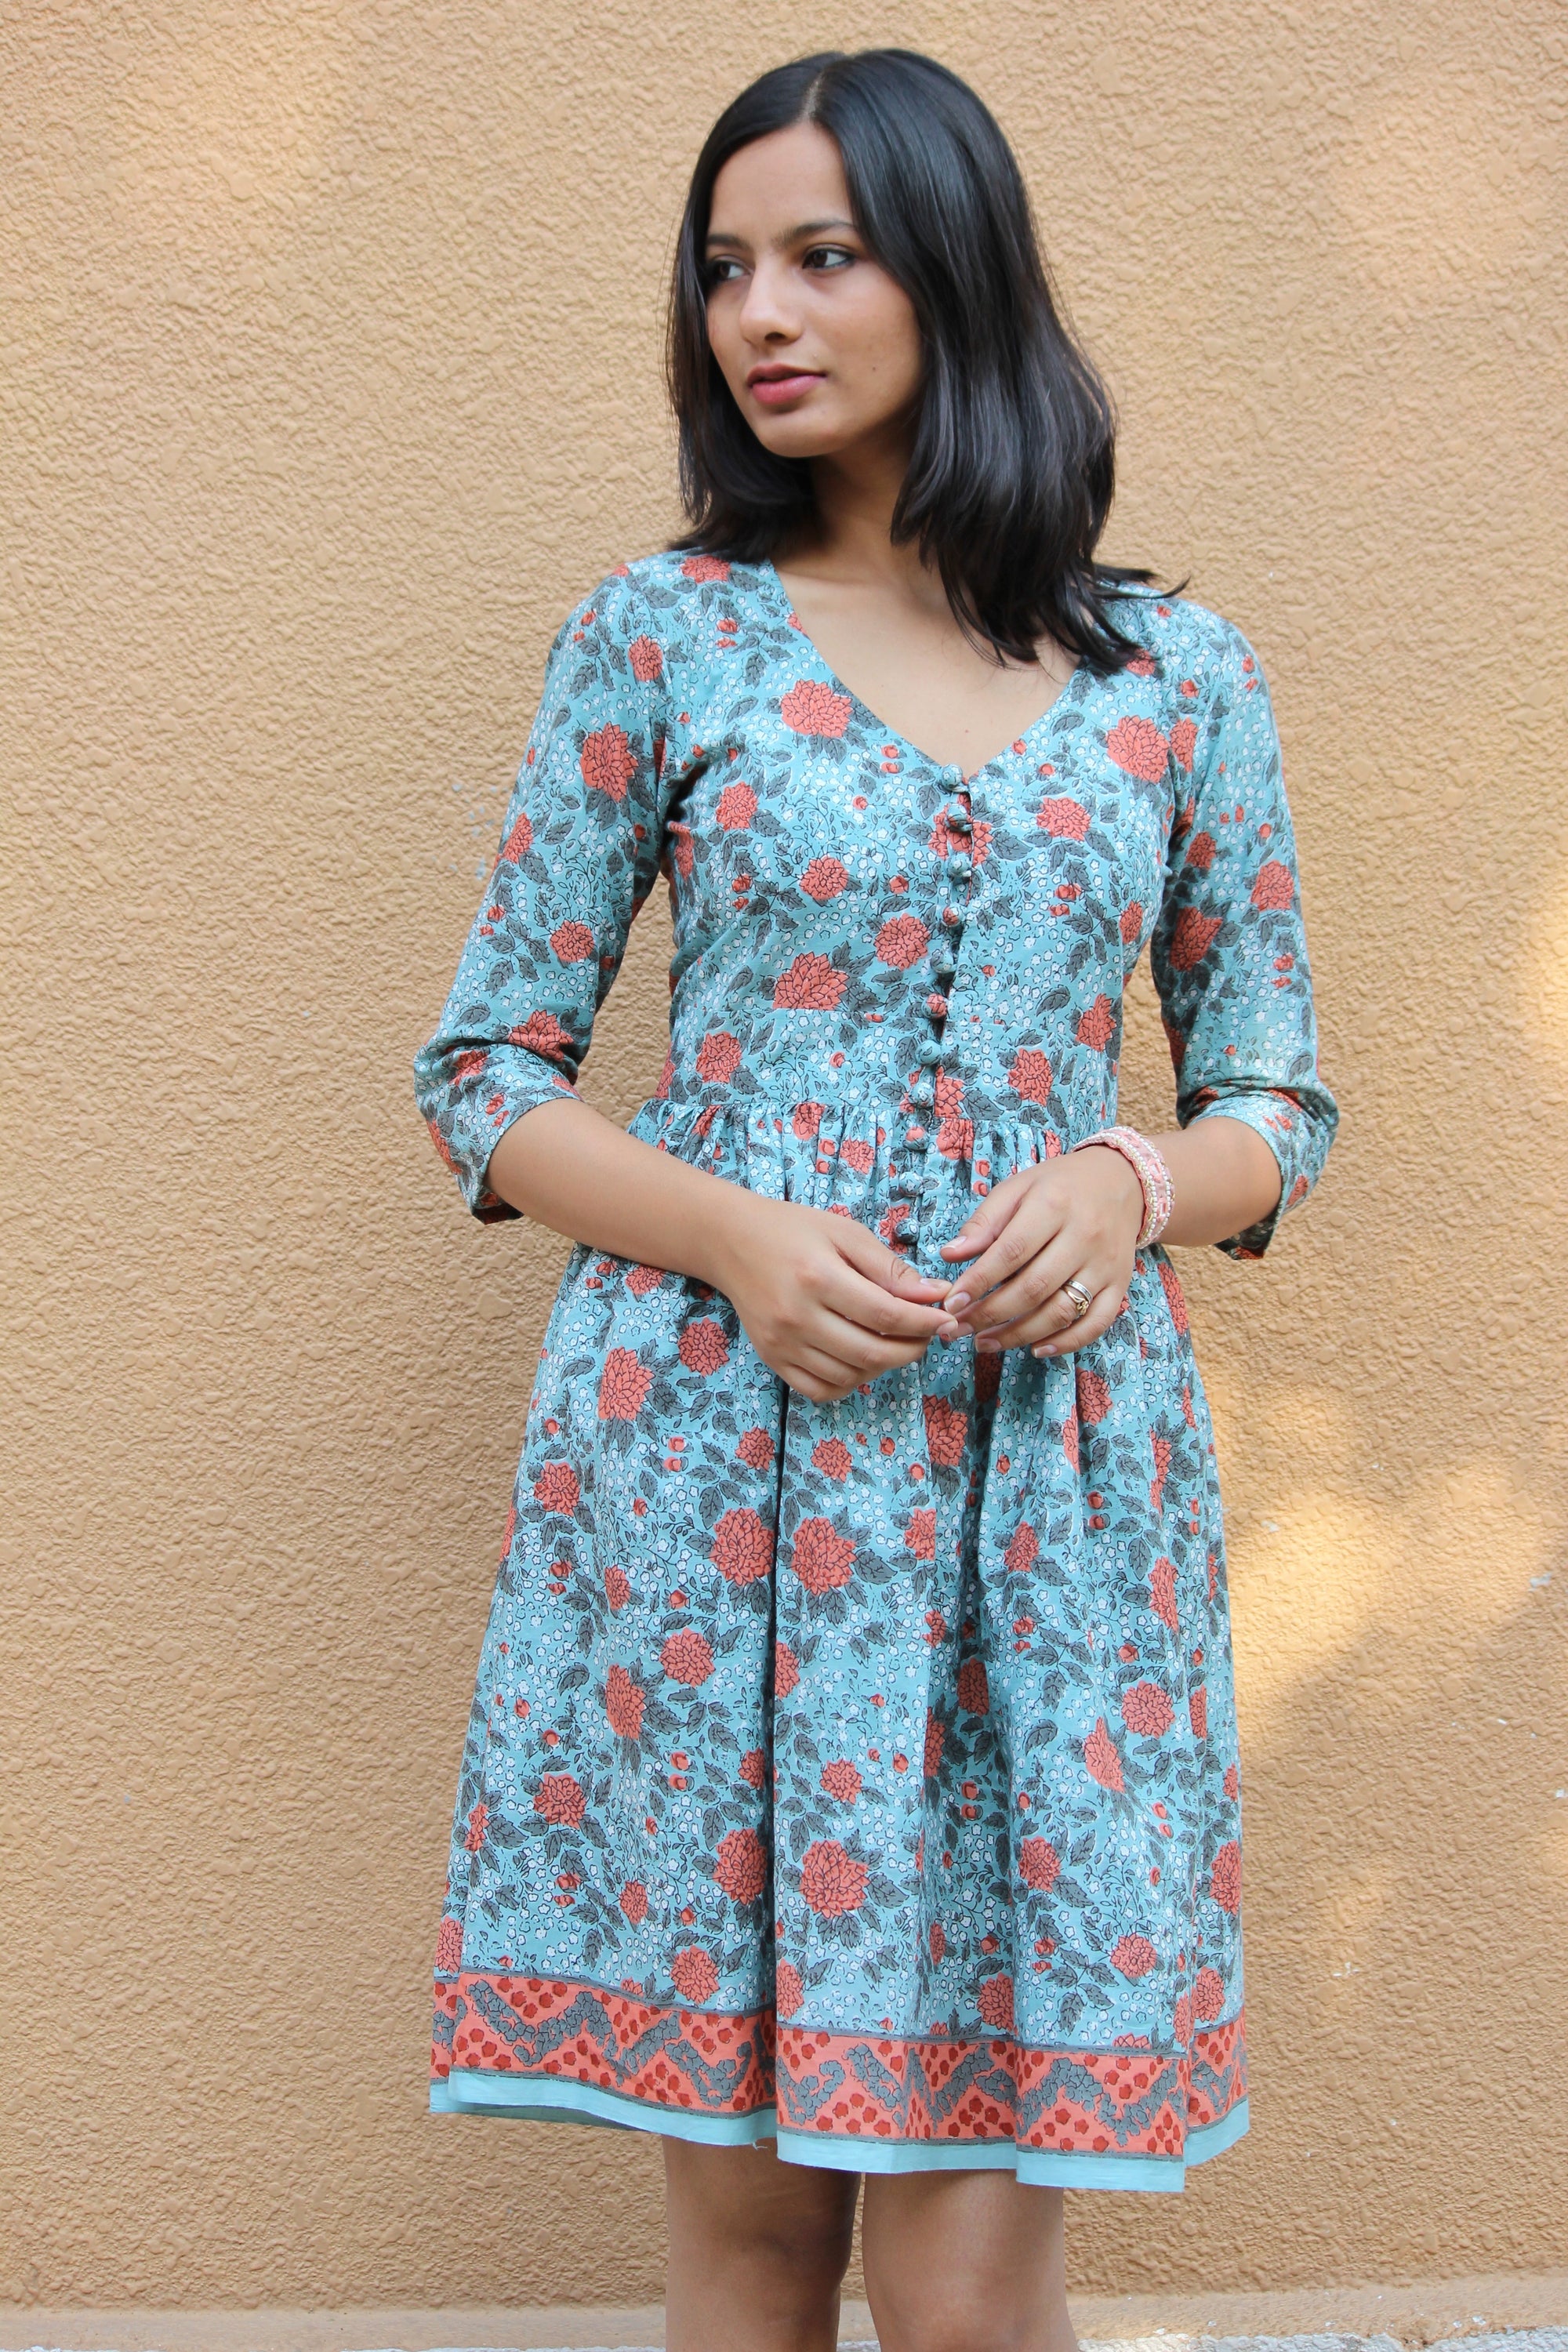 Blue Orchid Printed Dress